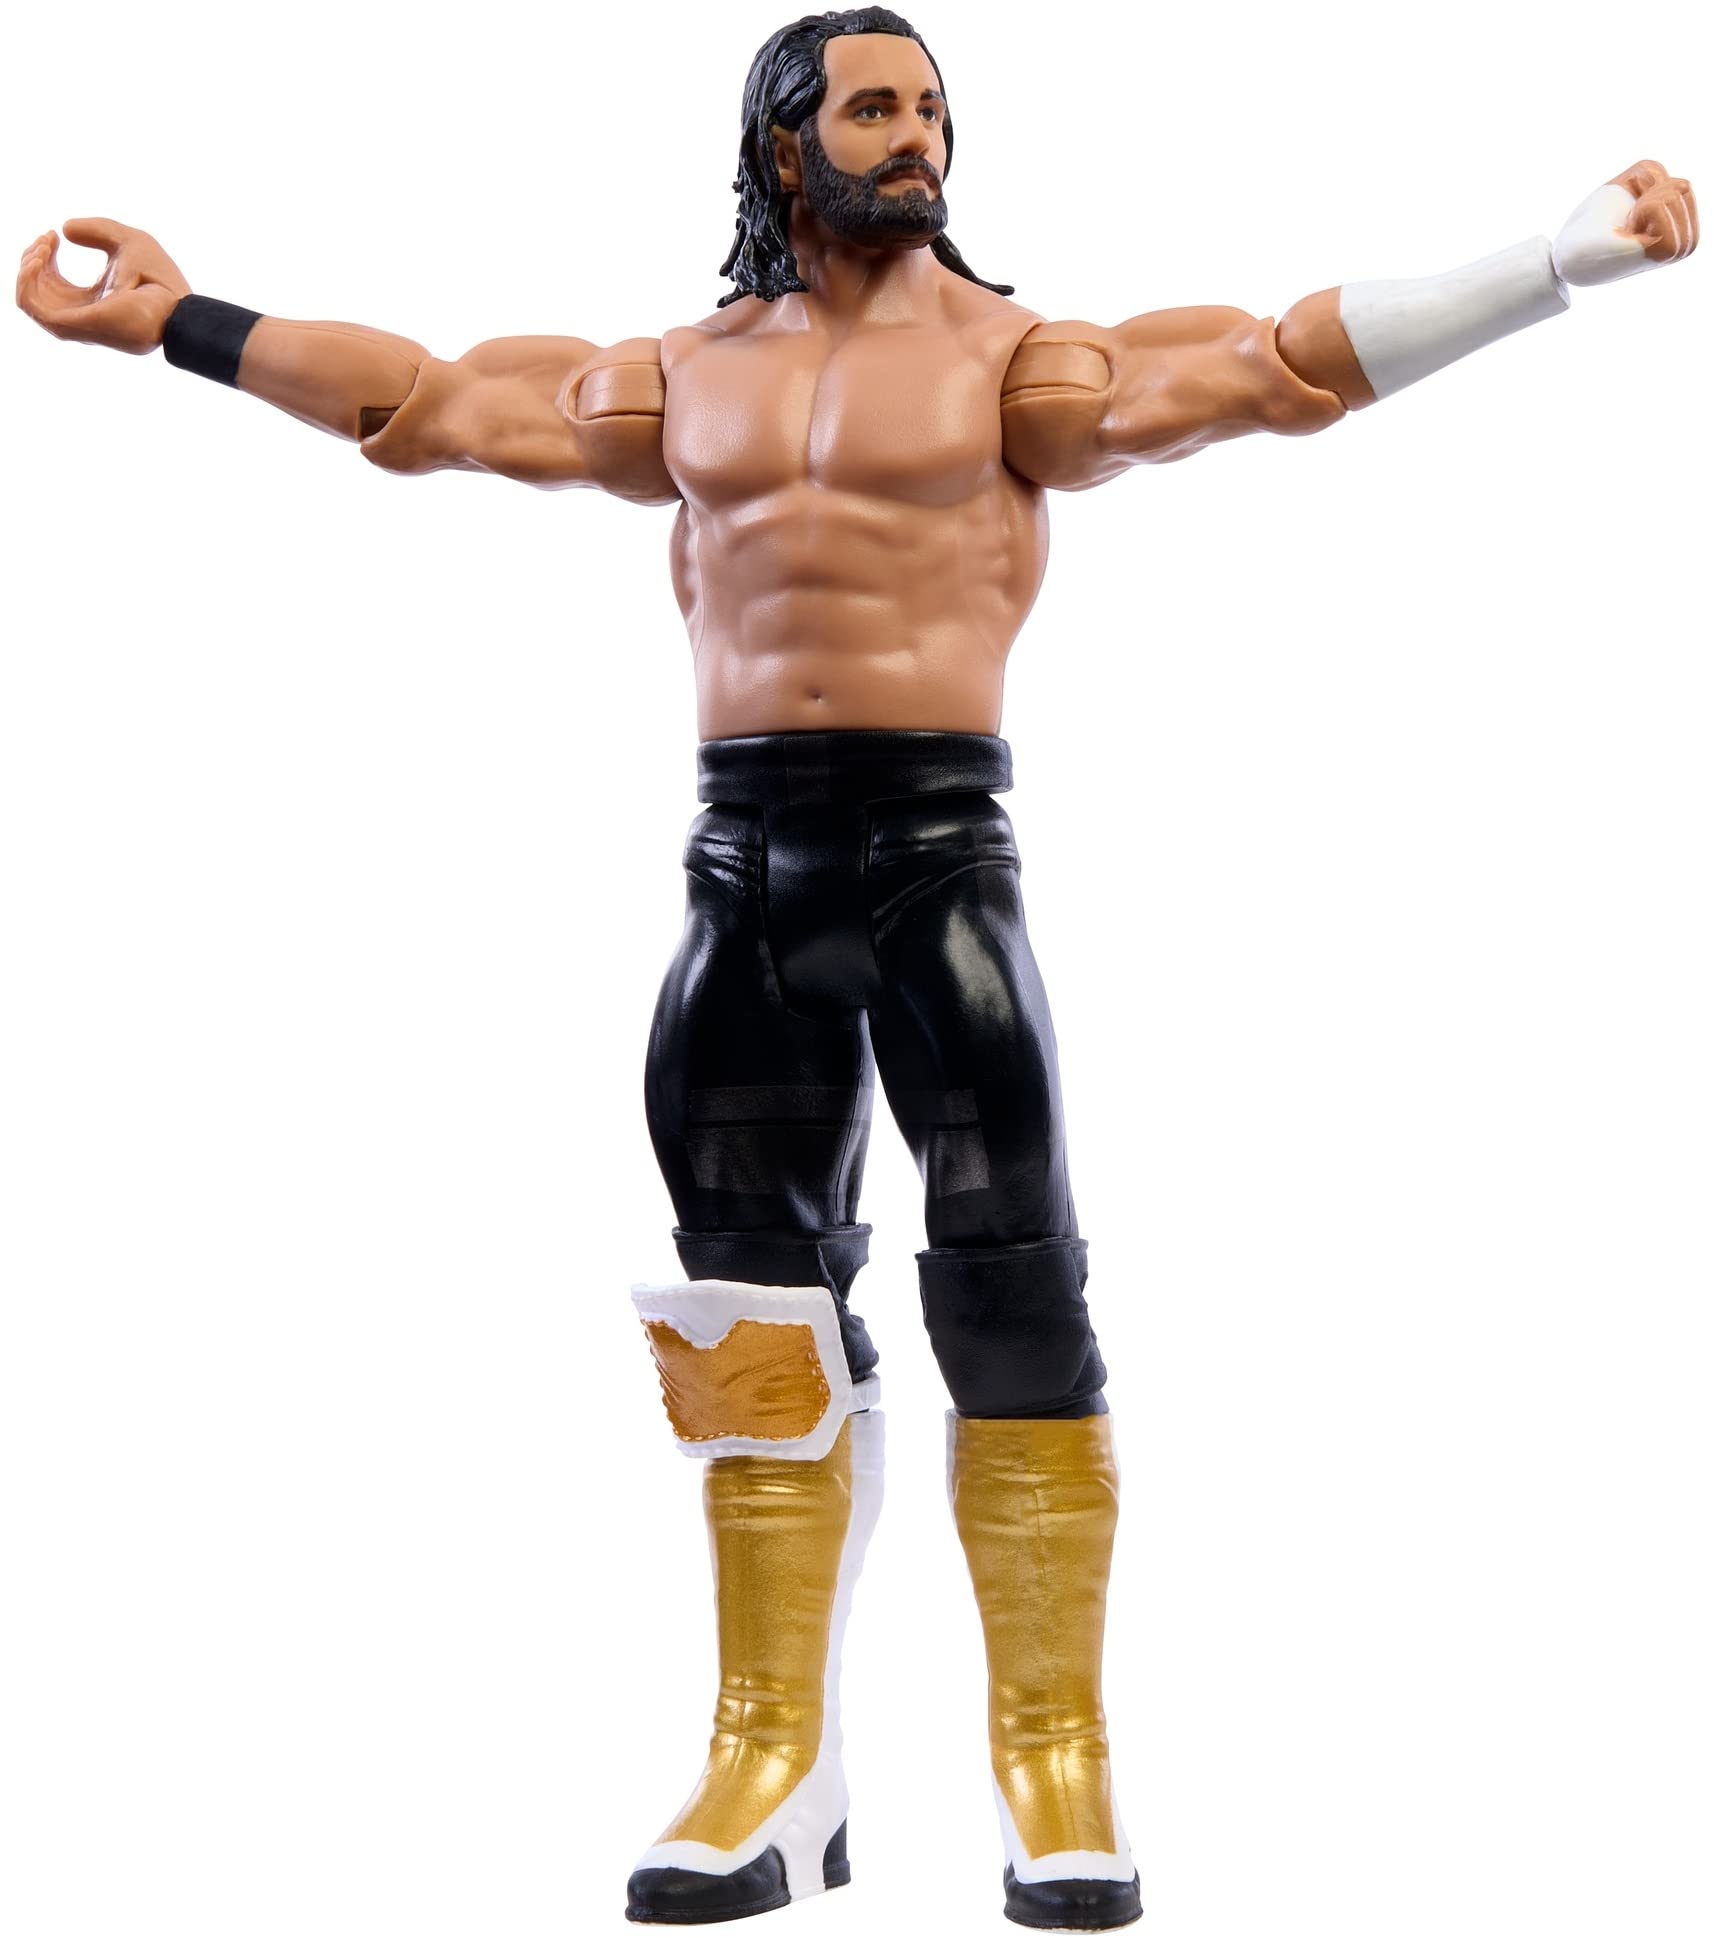 Mattel WWE Seth Rollins Basic Action Figure, 10 Points of Articulation & Life-Like Detail, 6-Inch Collectible